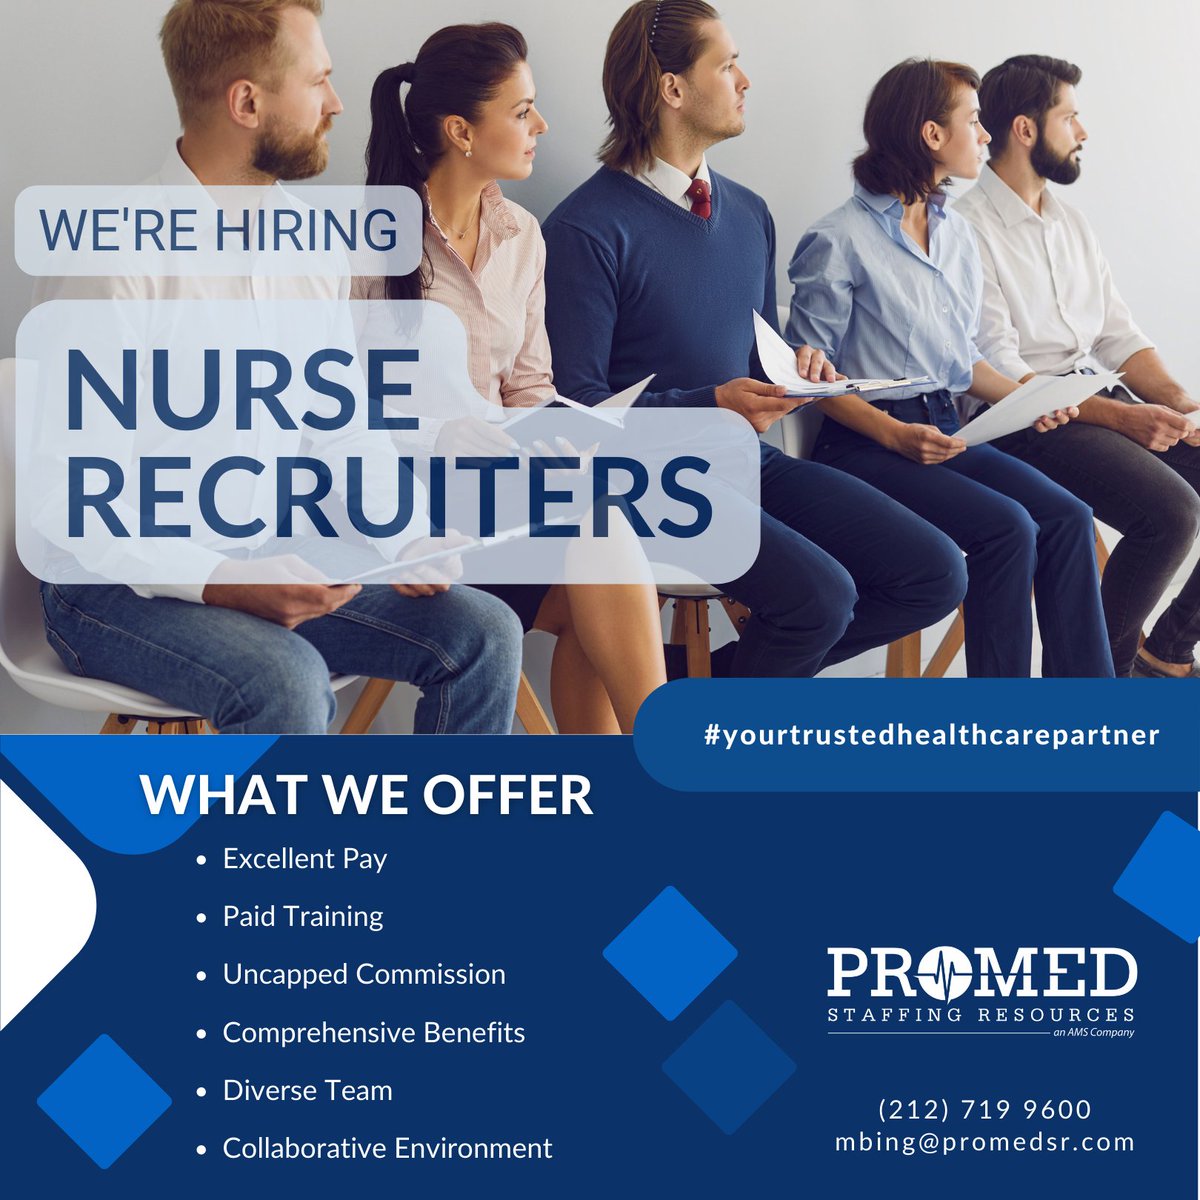 Grow your #recruitmentcareer to the next level and #join a diverse, high-performing #team at ProMed Staffing Resources. Submit your resume to Maria Bingeman at mbing@promedsr.com
  
#healthcarestaffing #nurserecruiting #nursestaffing #applicanttrackingsystem #promedsr